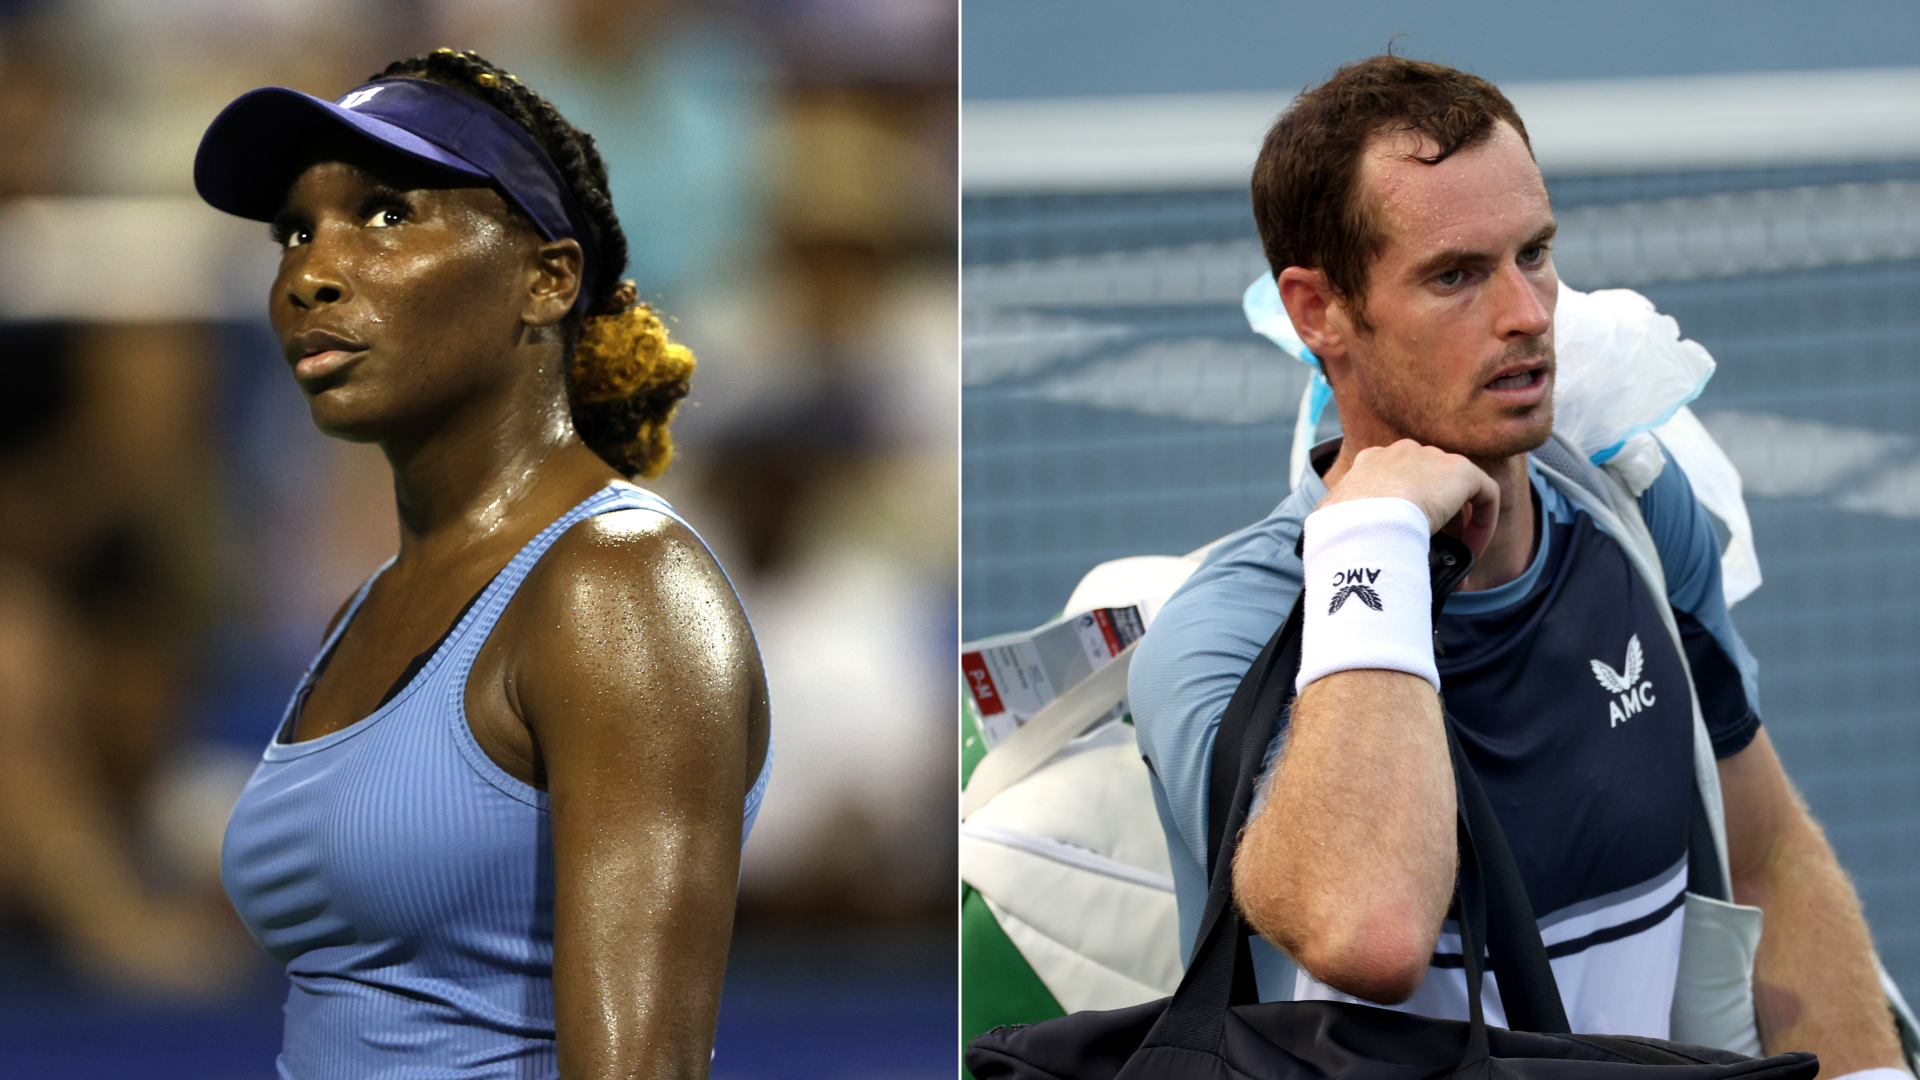 Venus Williams and Andy Murray